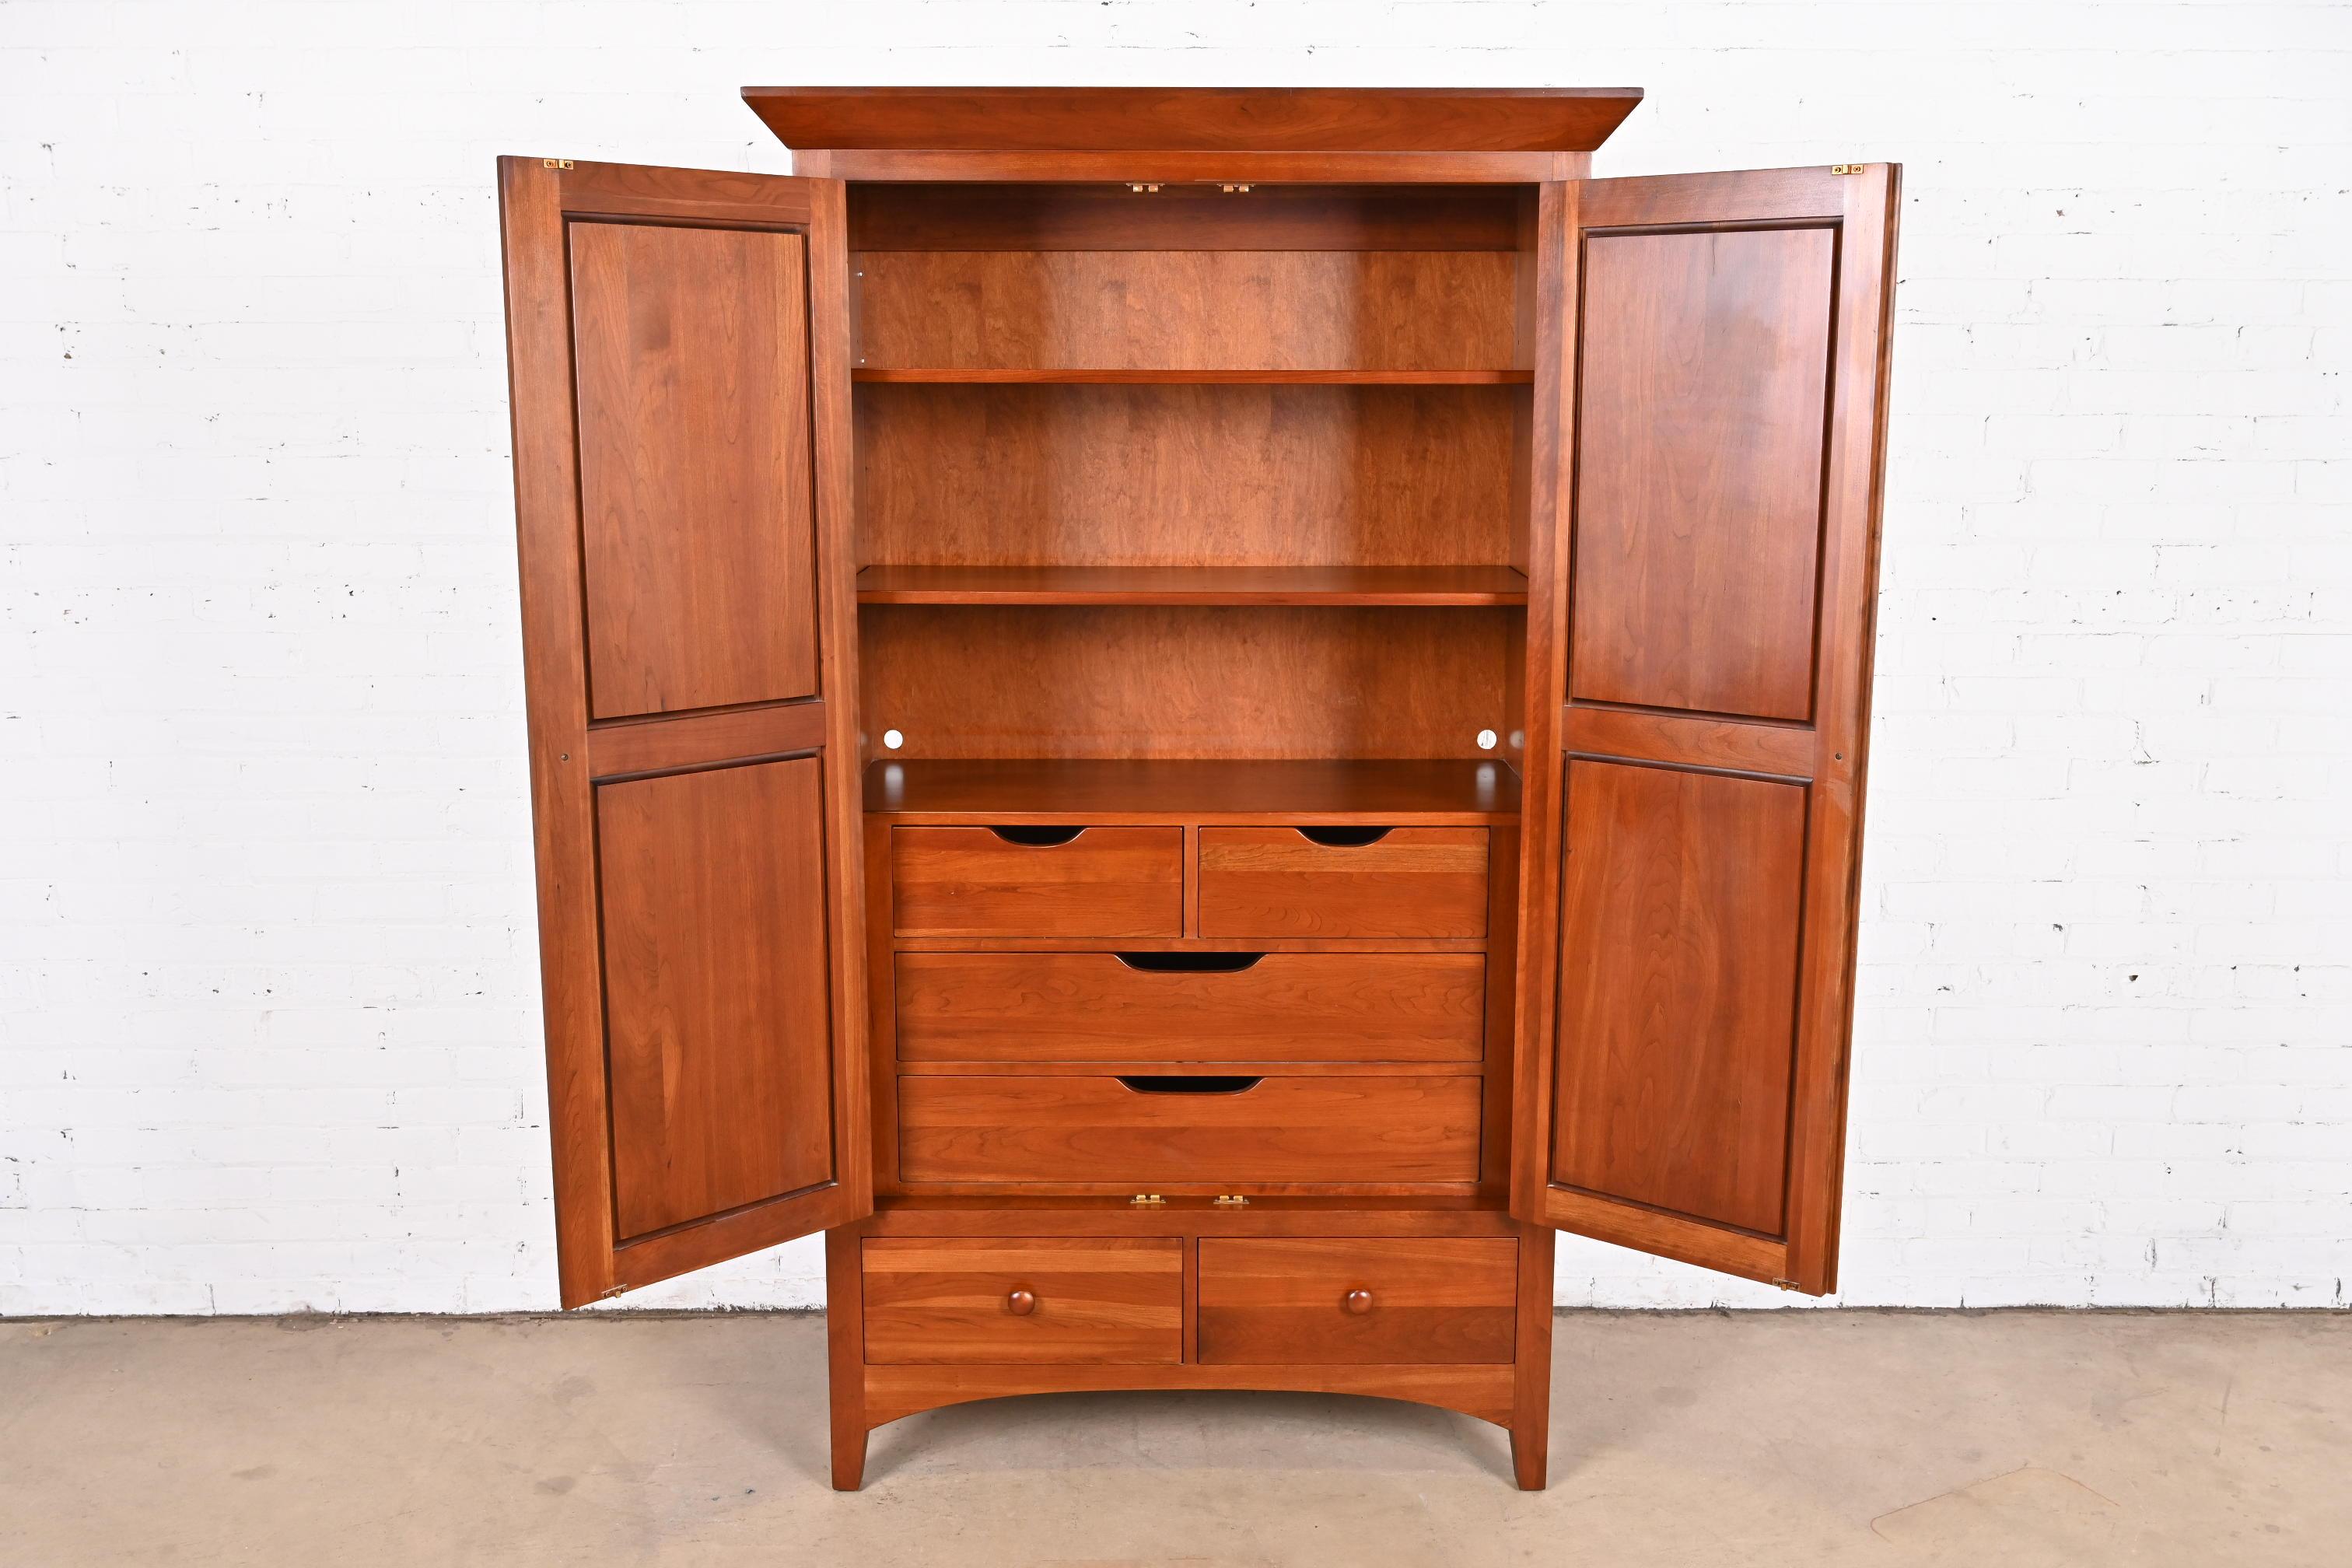 American Arts & Crafts Solid Cherry Wood Armoire Dresser